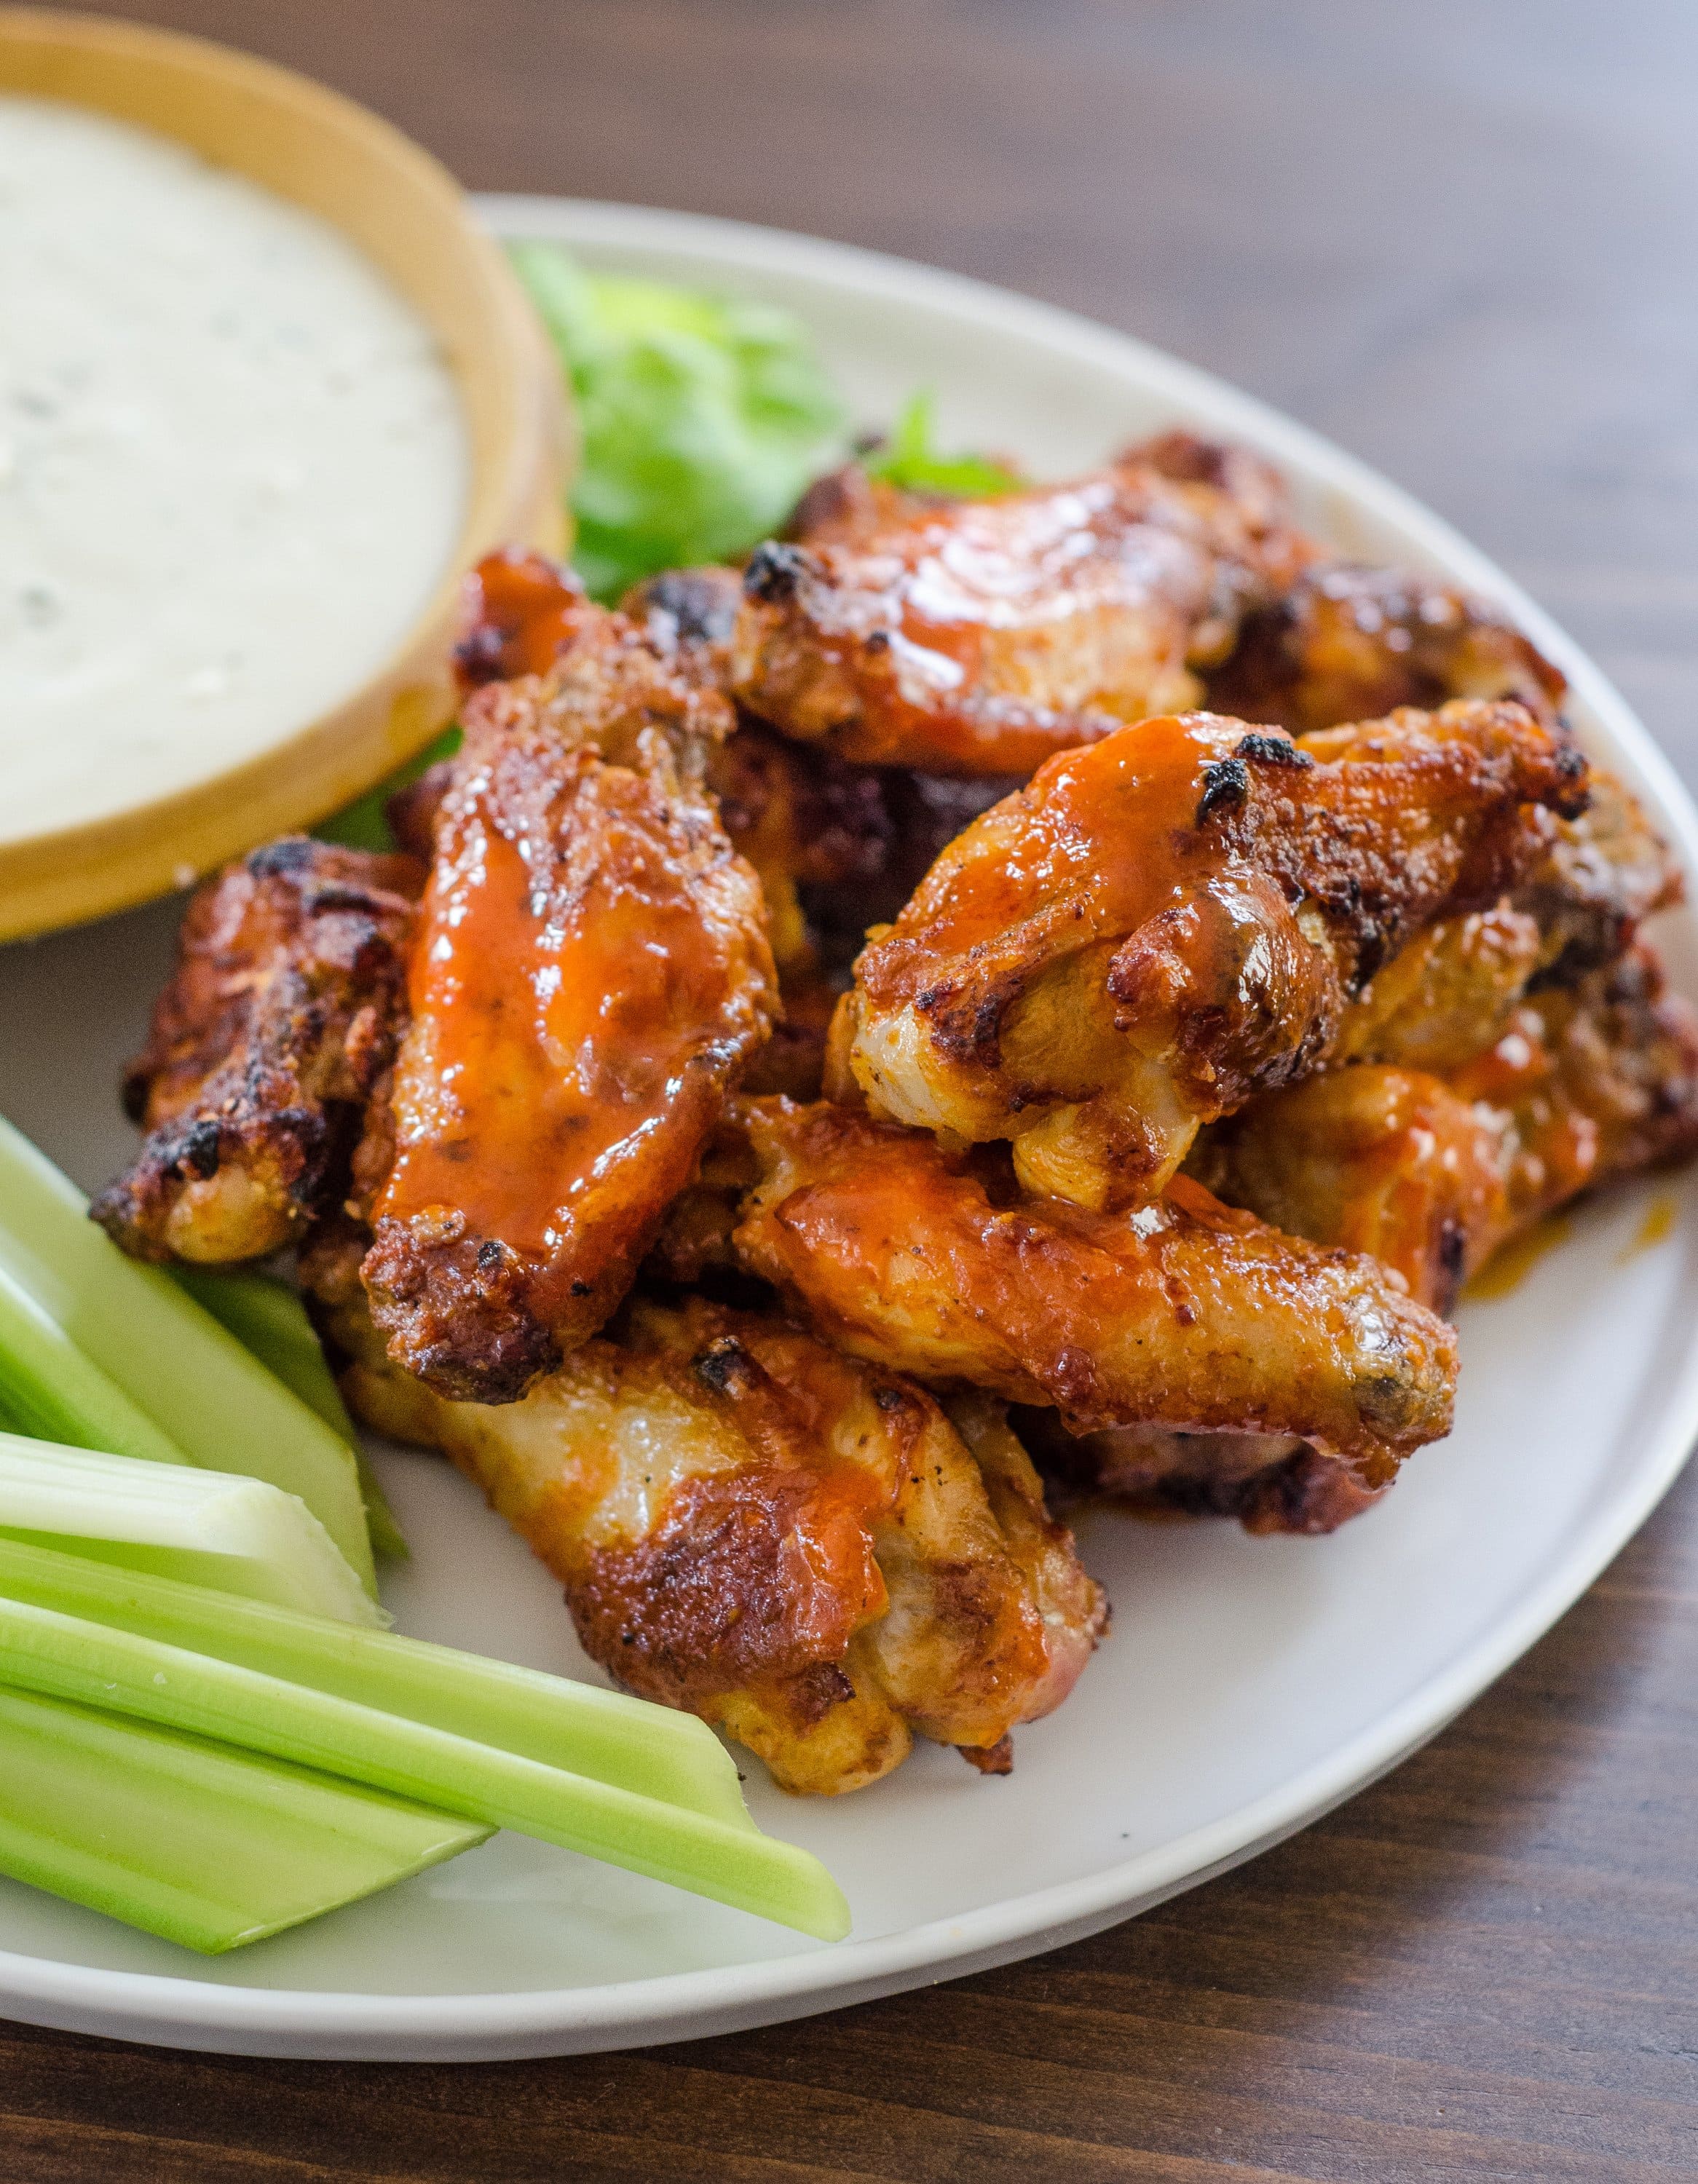 How To Make Buffalo Chicken Wings in the Oven | Kitchn